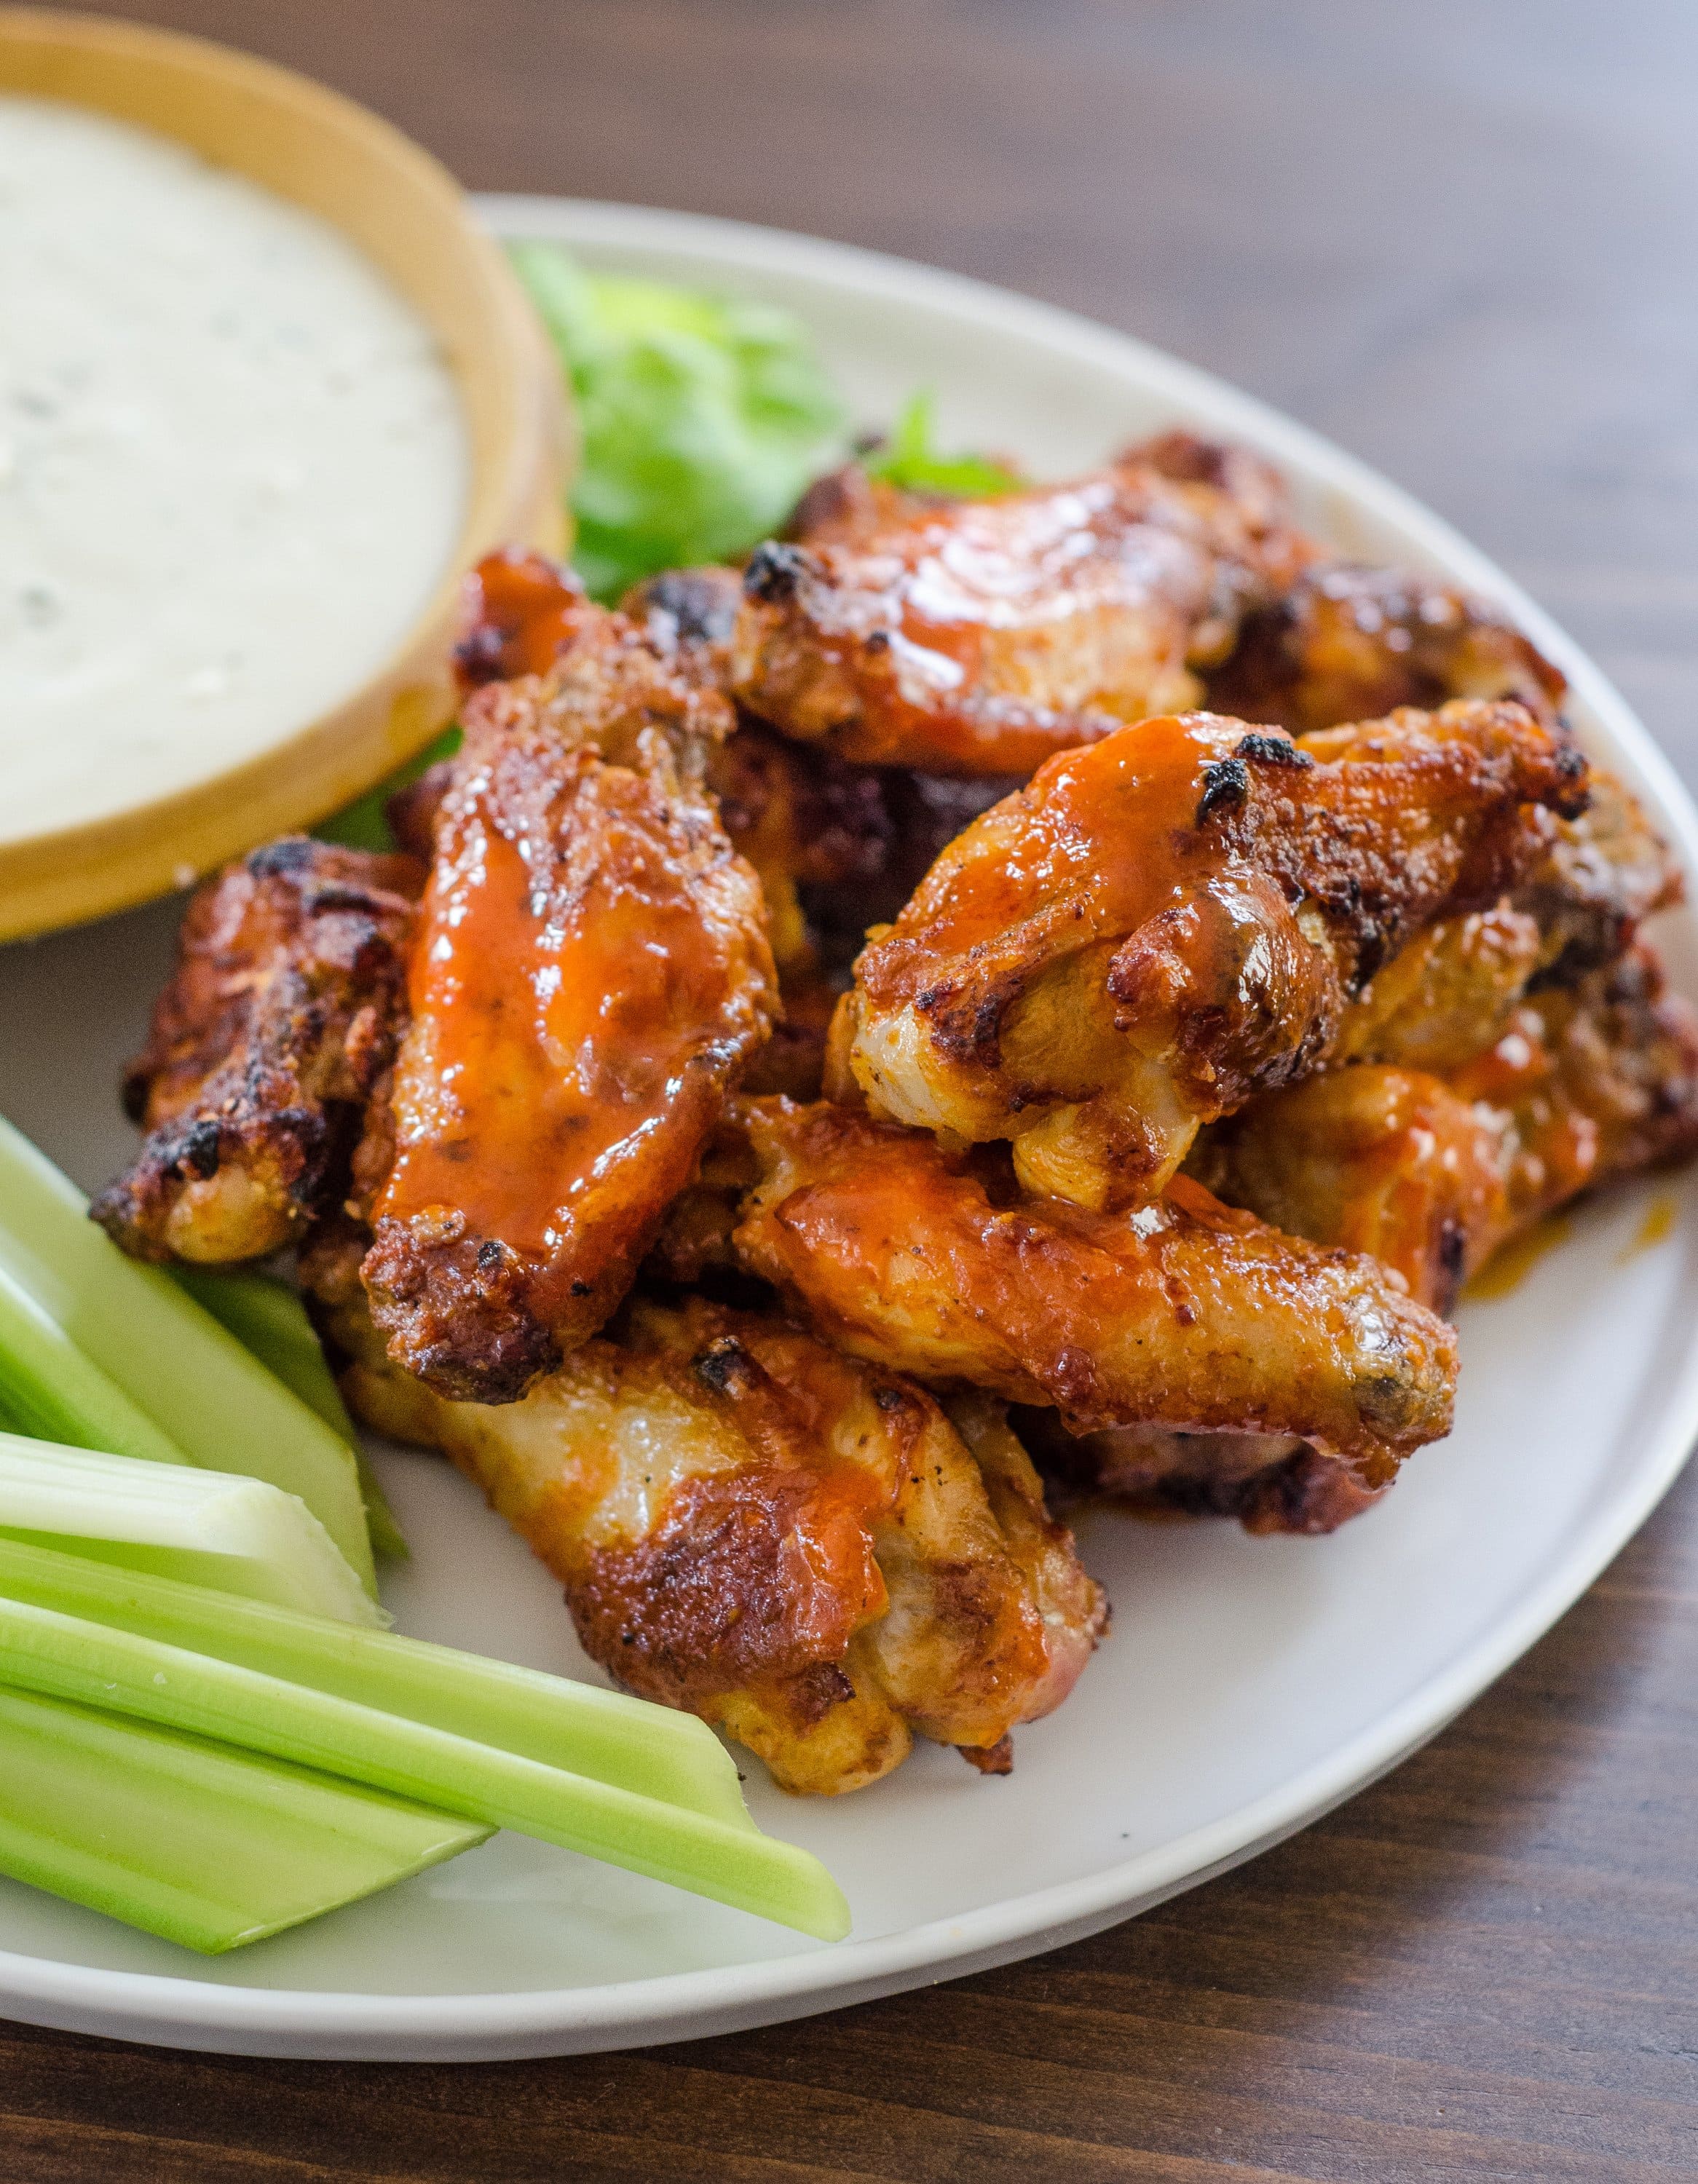 How To Make Buffalo Chicken Wings in the Oven | Kitchn